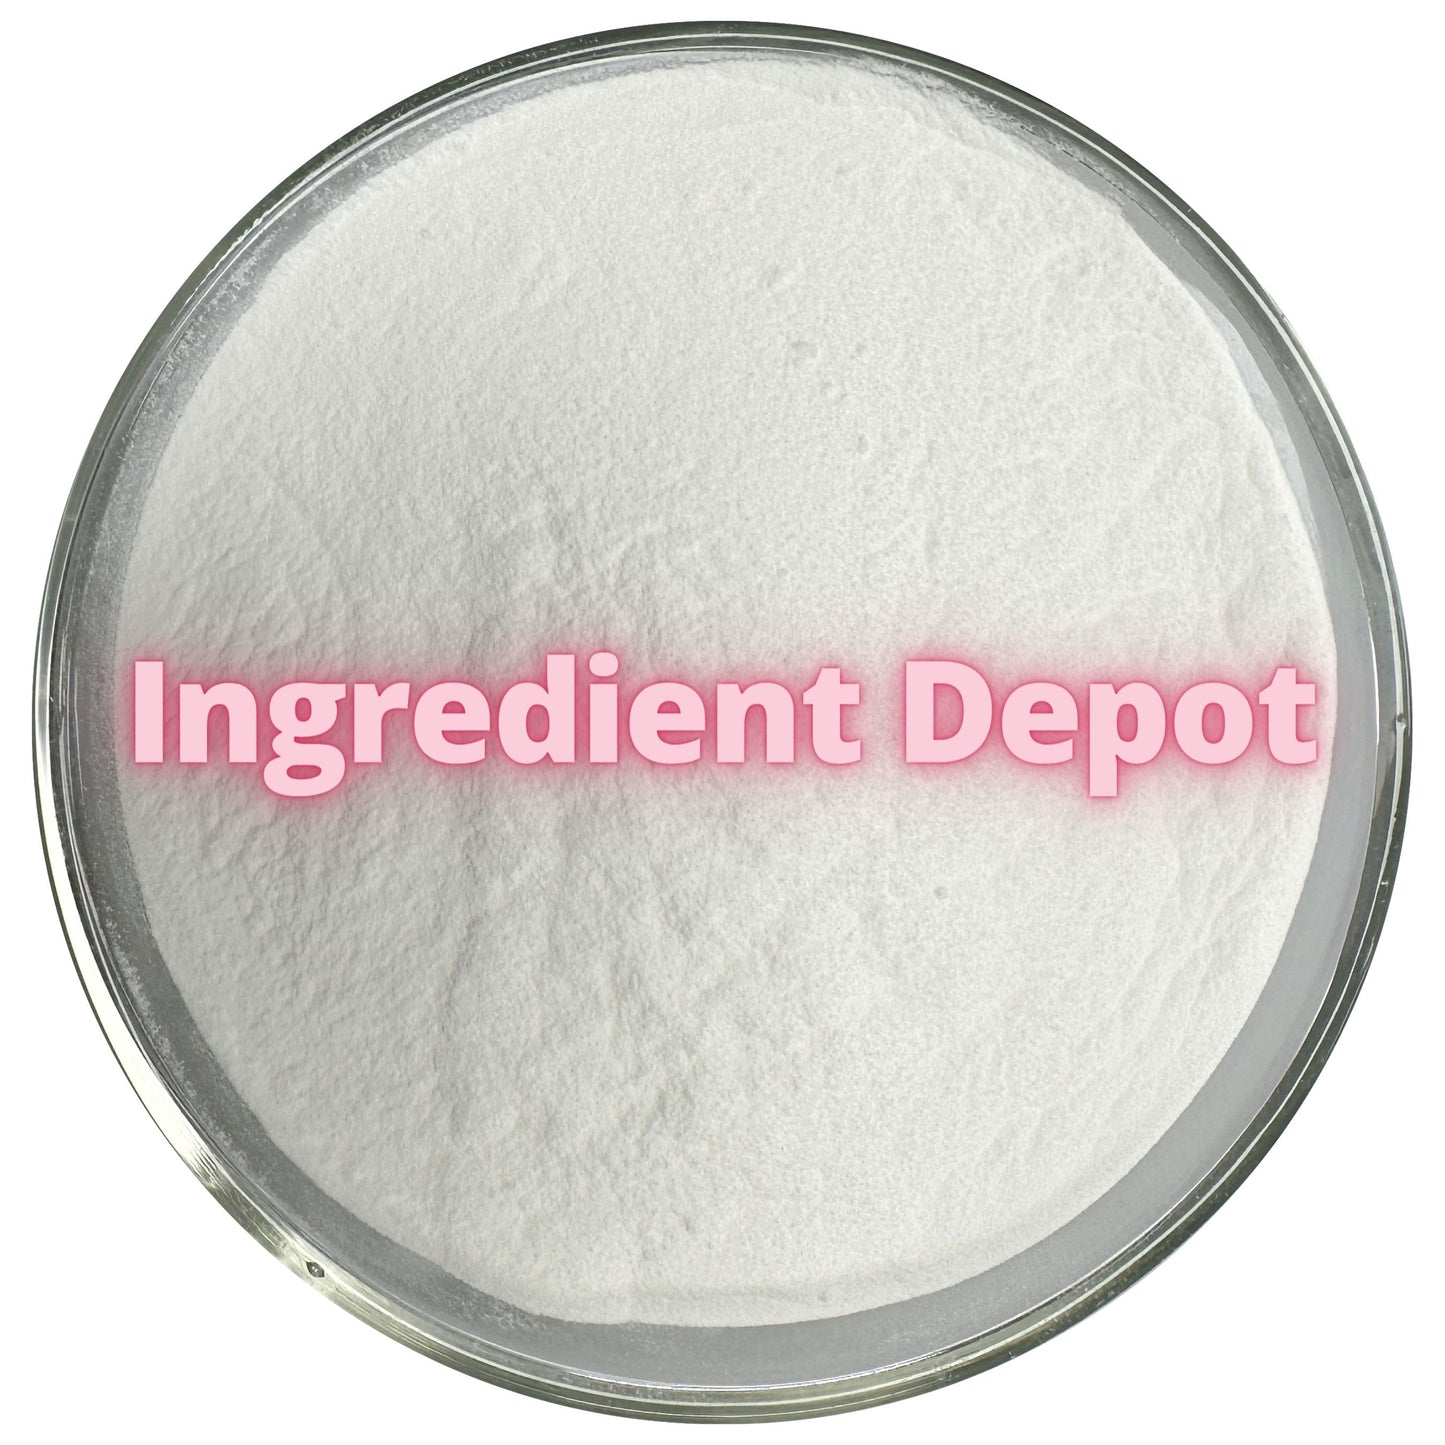 SMCC 50 Silicified Microcrystalline Cellulose - USP/NF Grade 3 kgs - Ingredient Depot